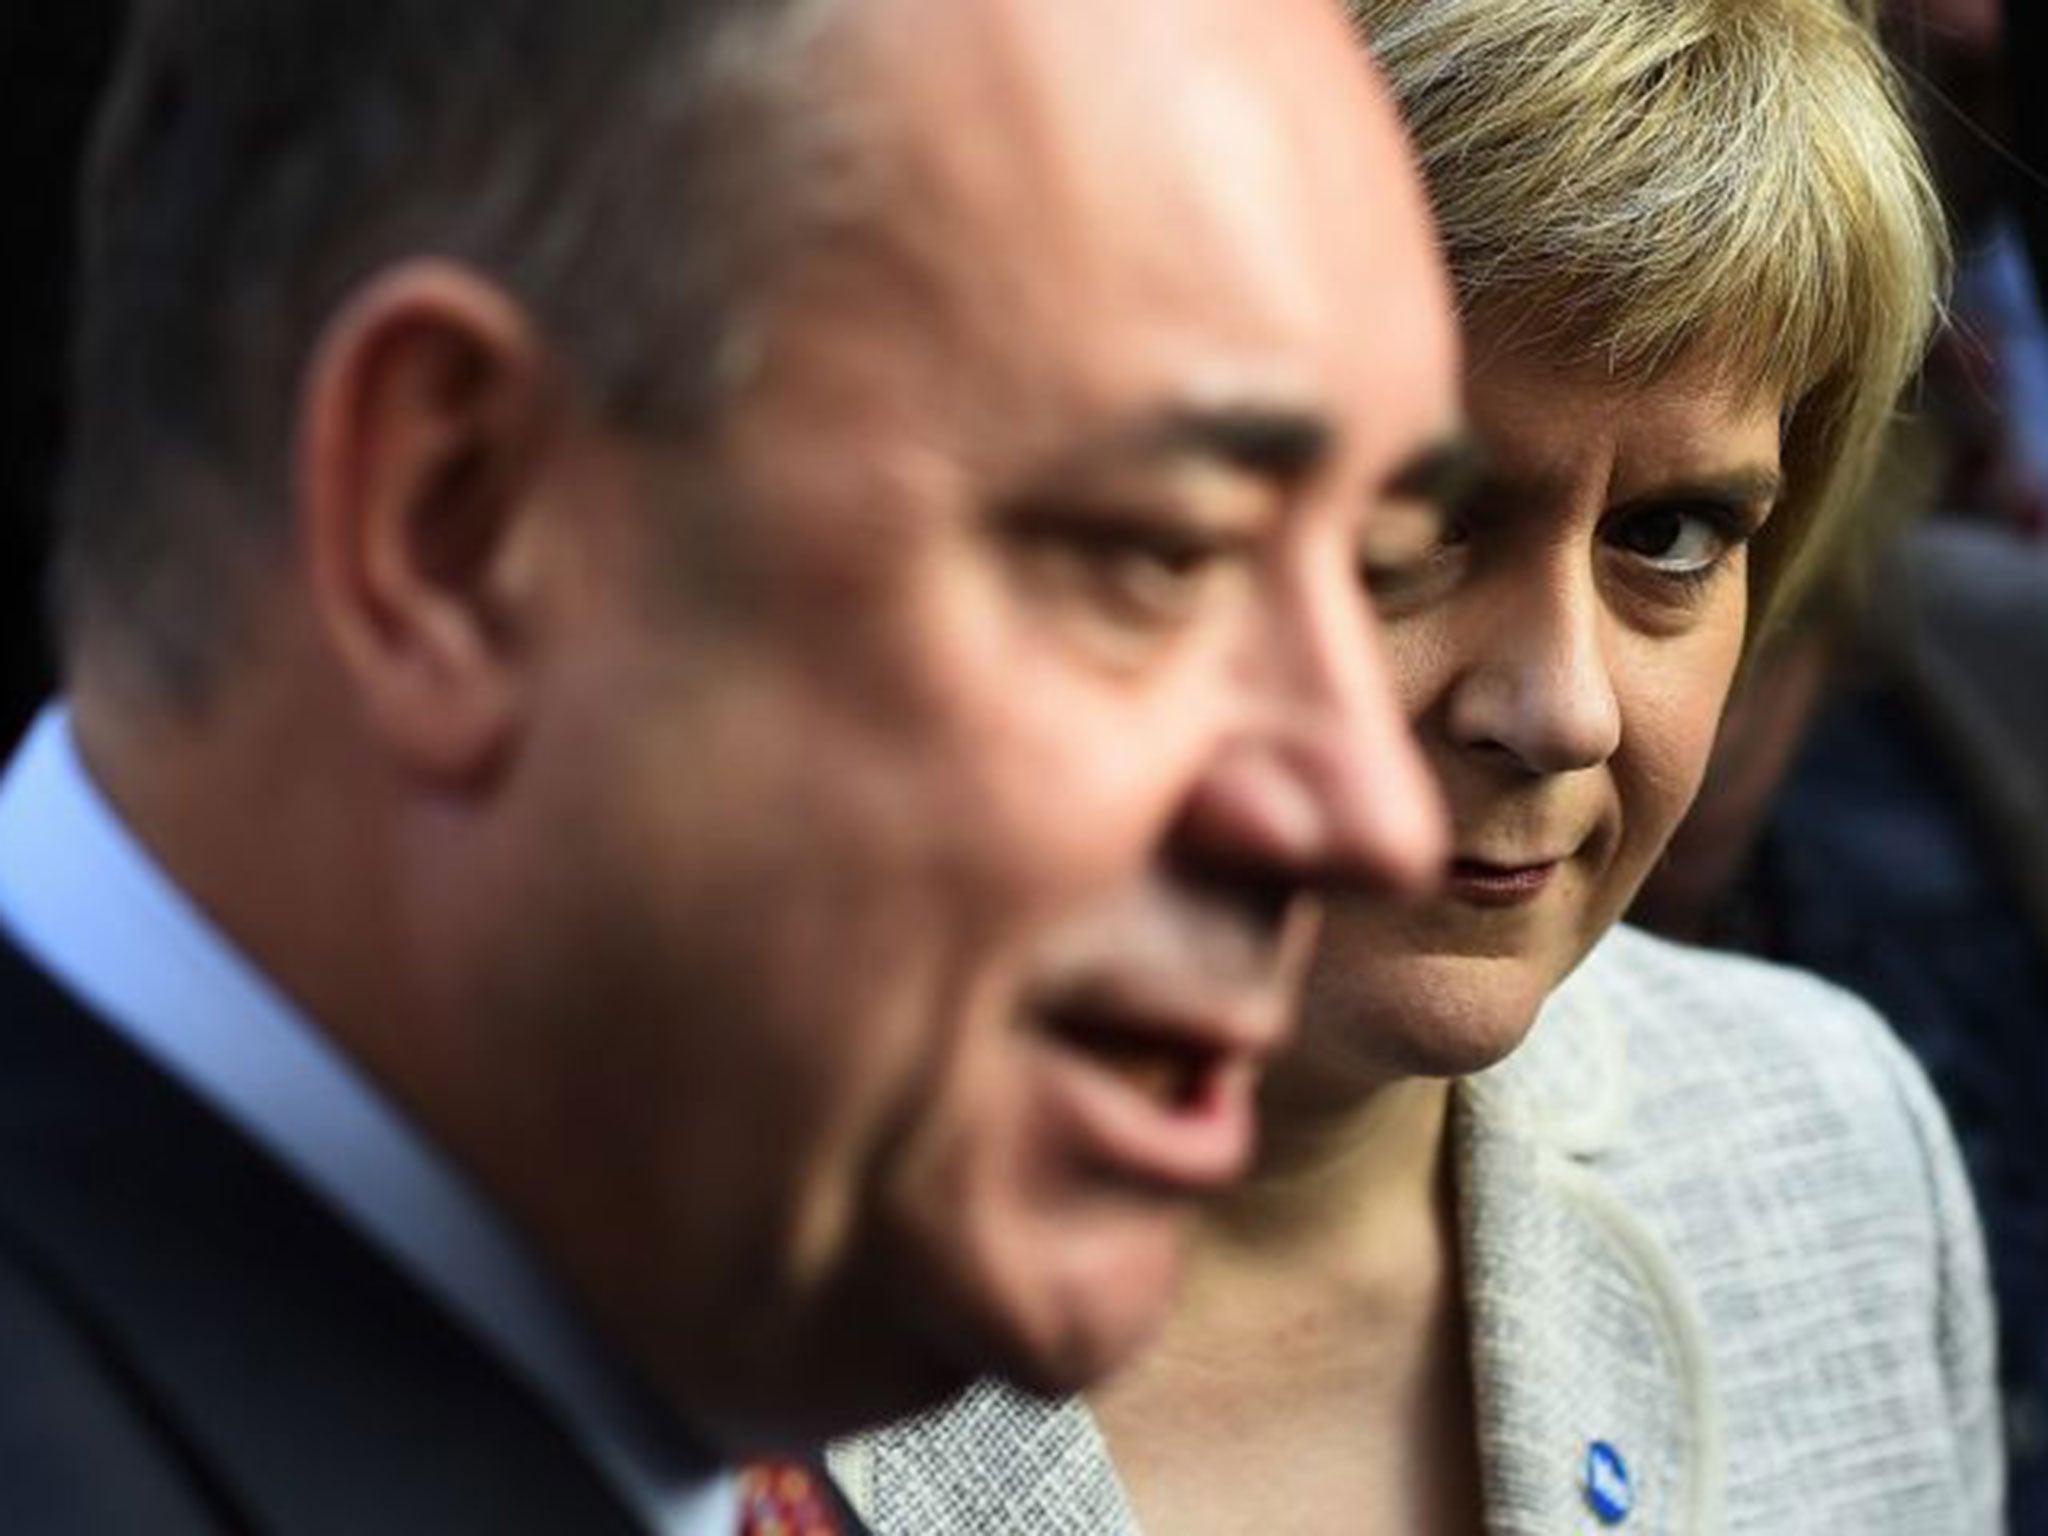 Nicola Sturgeon and former boss Alex Salmond campaigning together. She is edging ever closer to SNP leadership (Reuters)